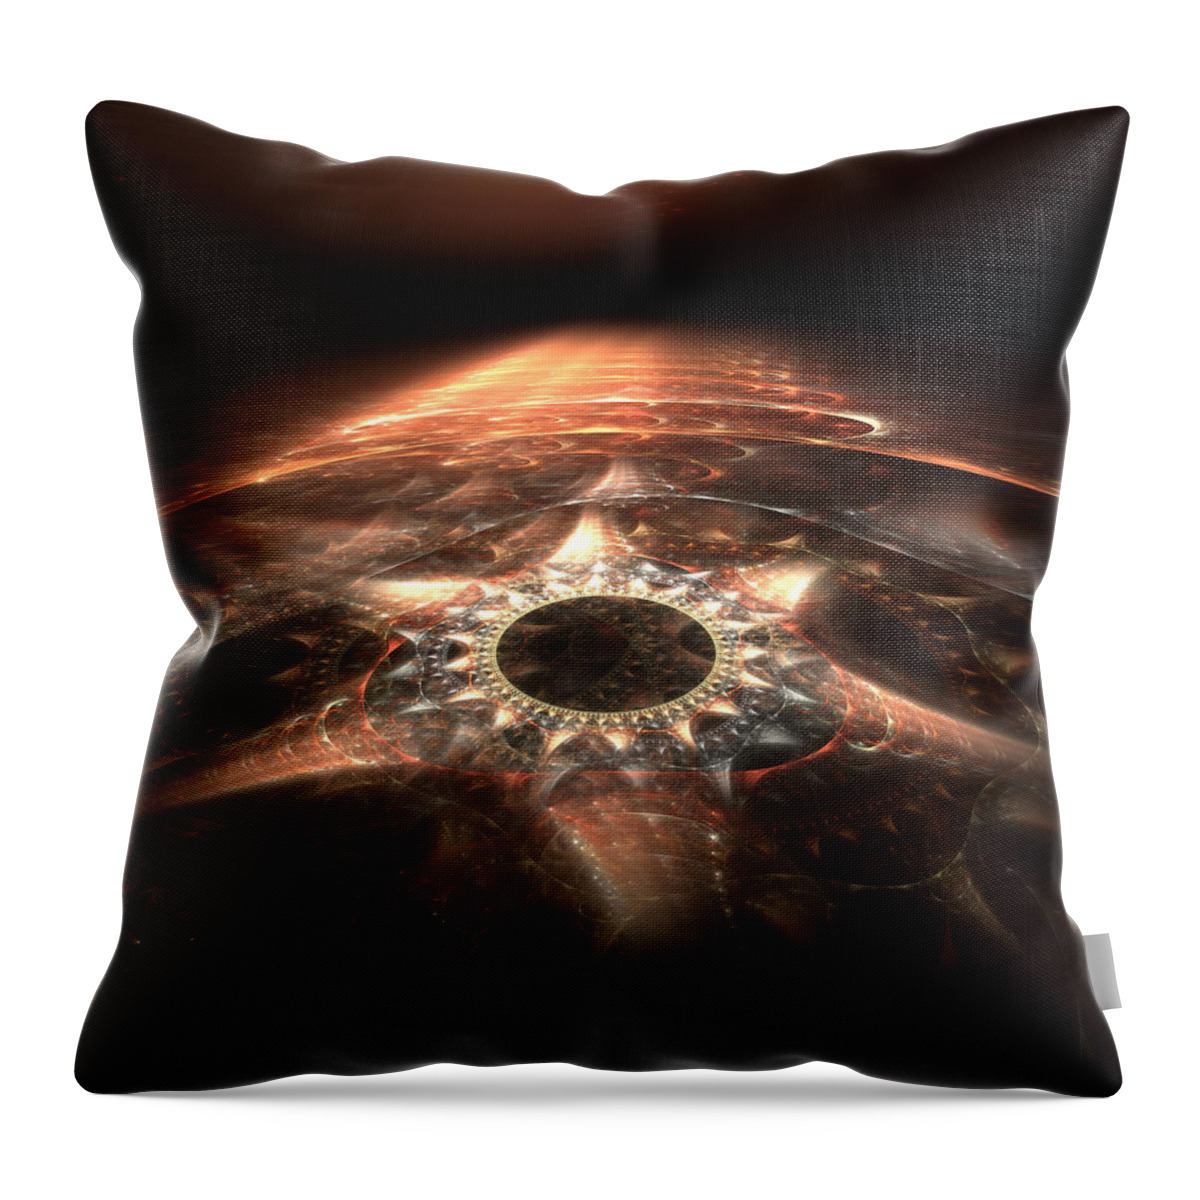 Fractal Throw Pillow featuring the digital art Stargate by Richard Ortolano